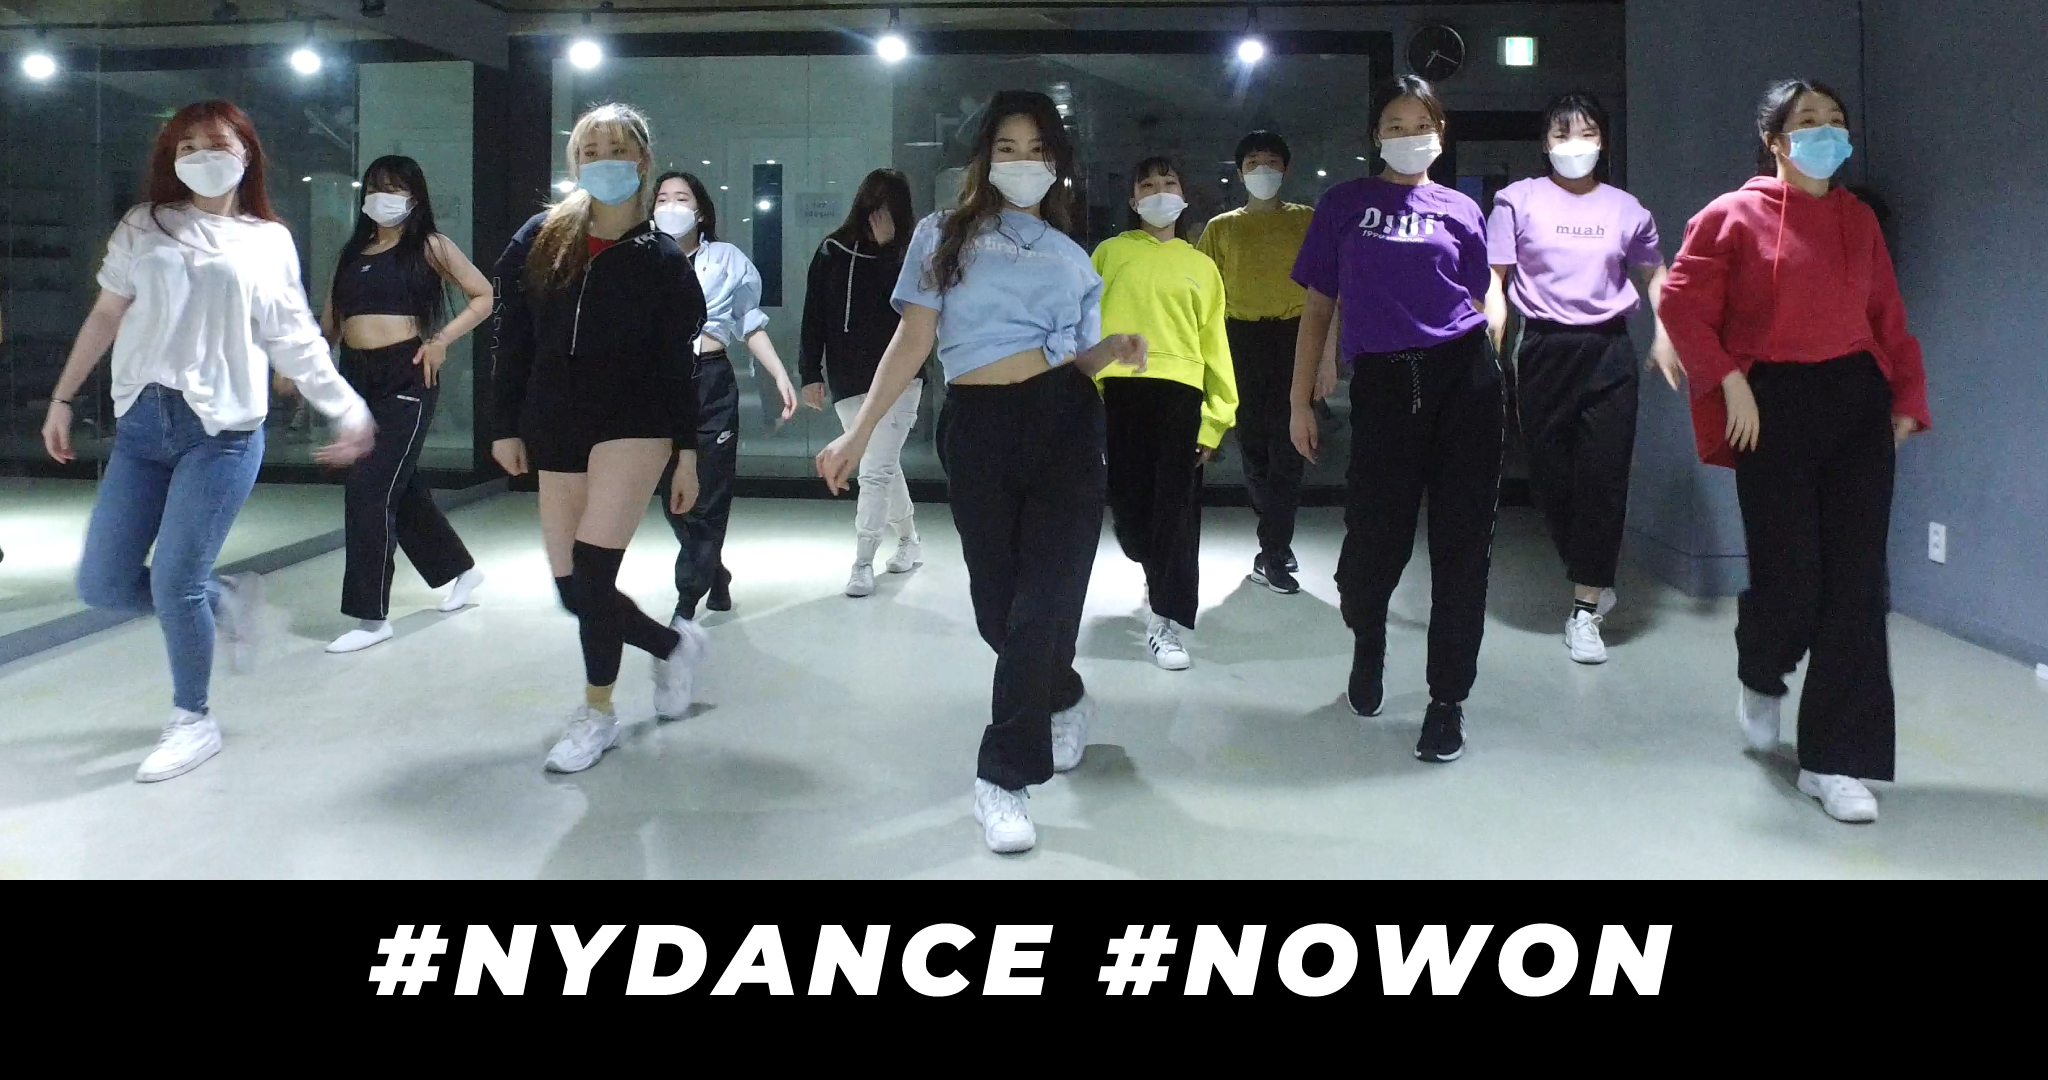 NYDANCE NOWON – WAACKING CLASS